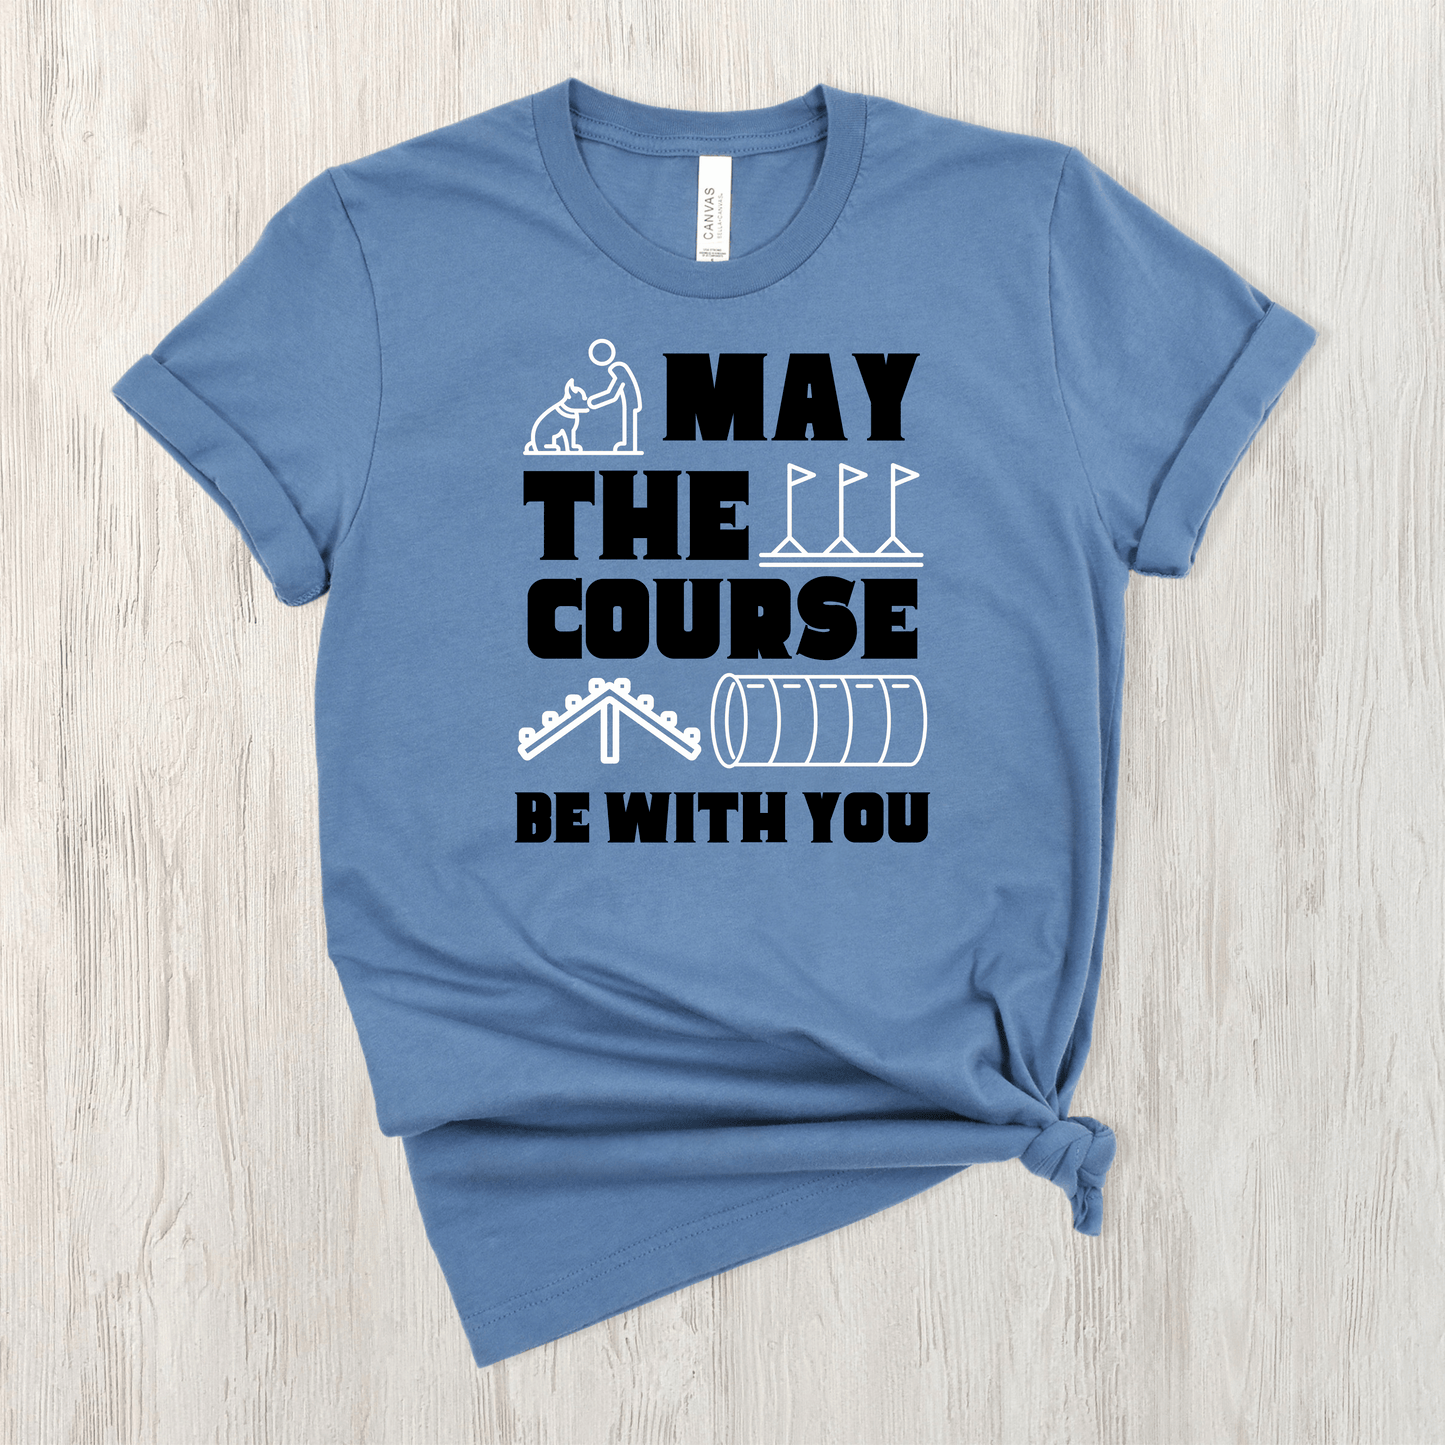 Steel Blue tee featuring the text "May The Force Be With You" as well as agility related images.